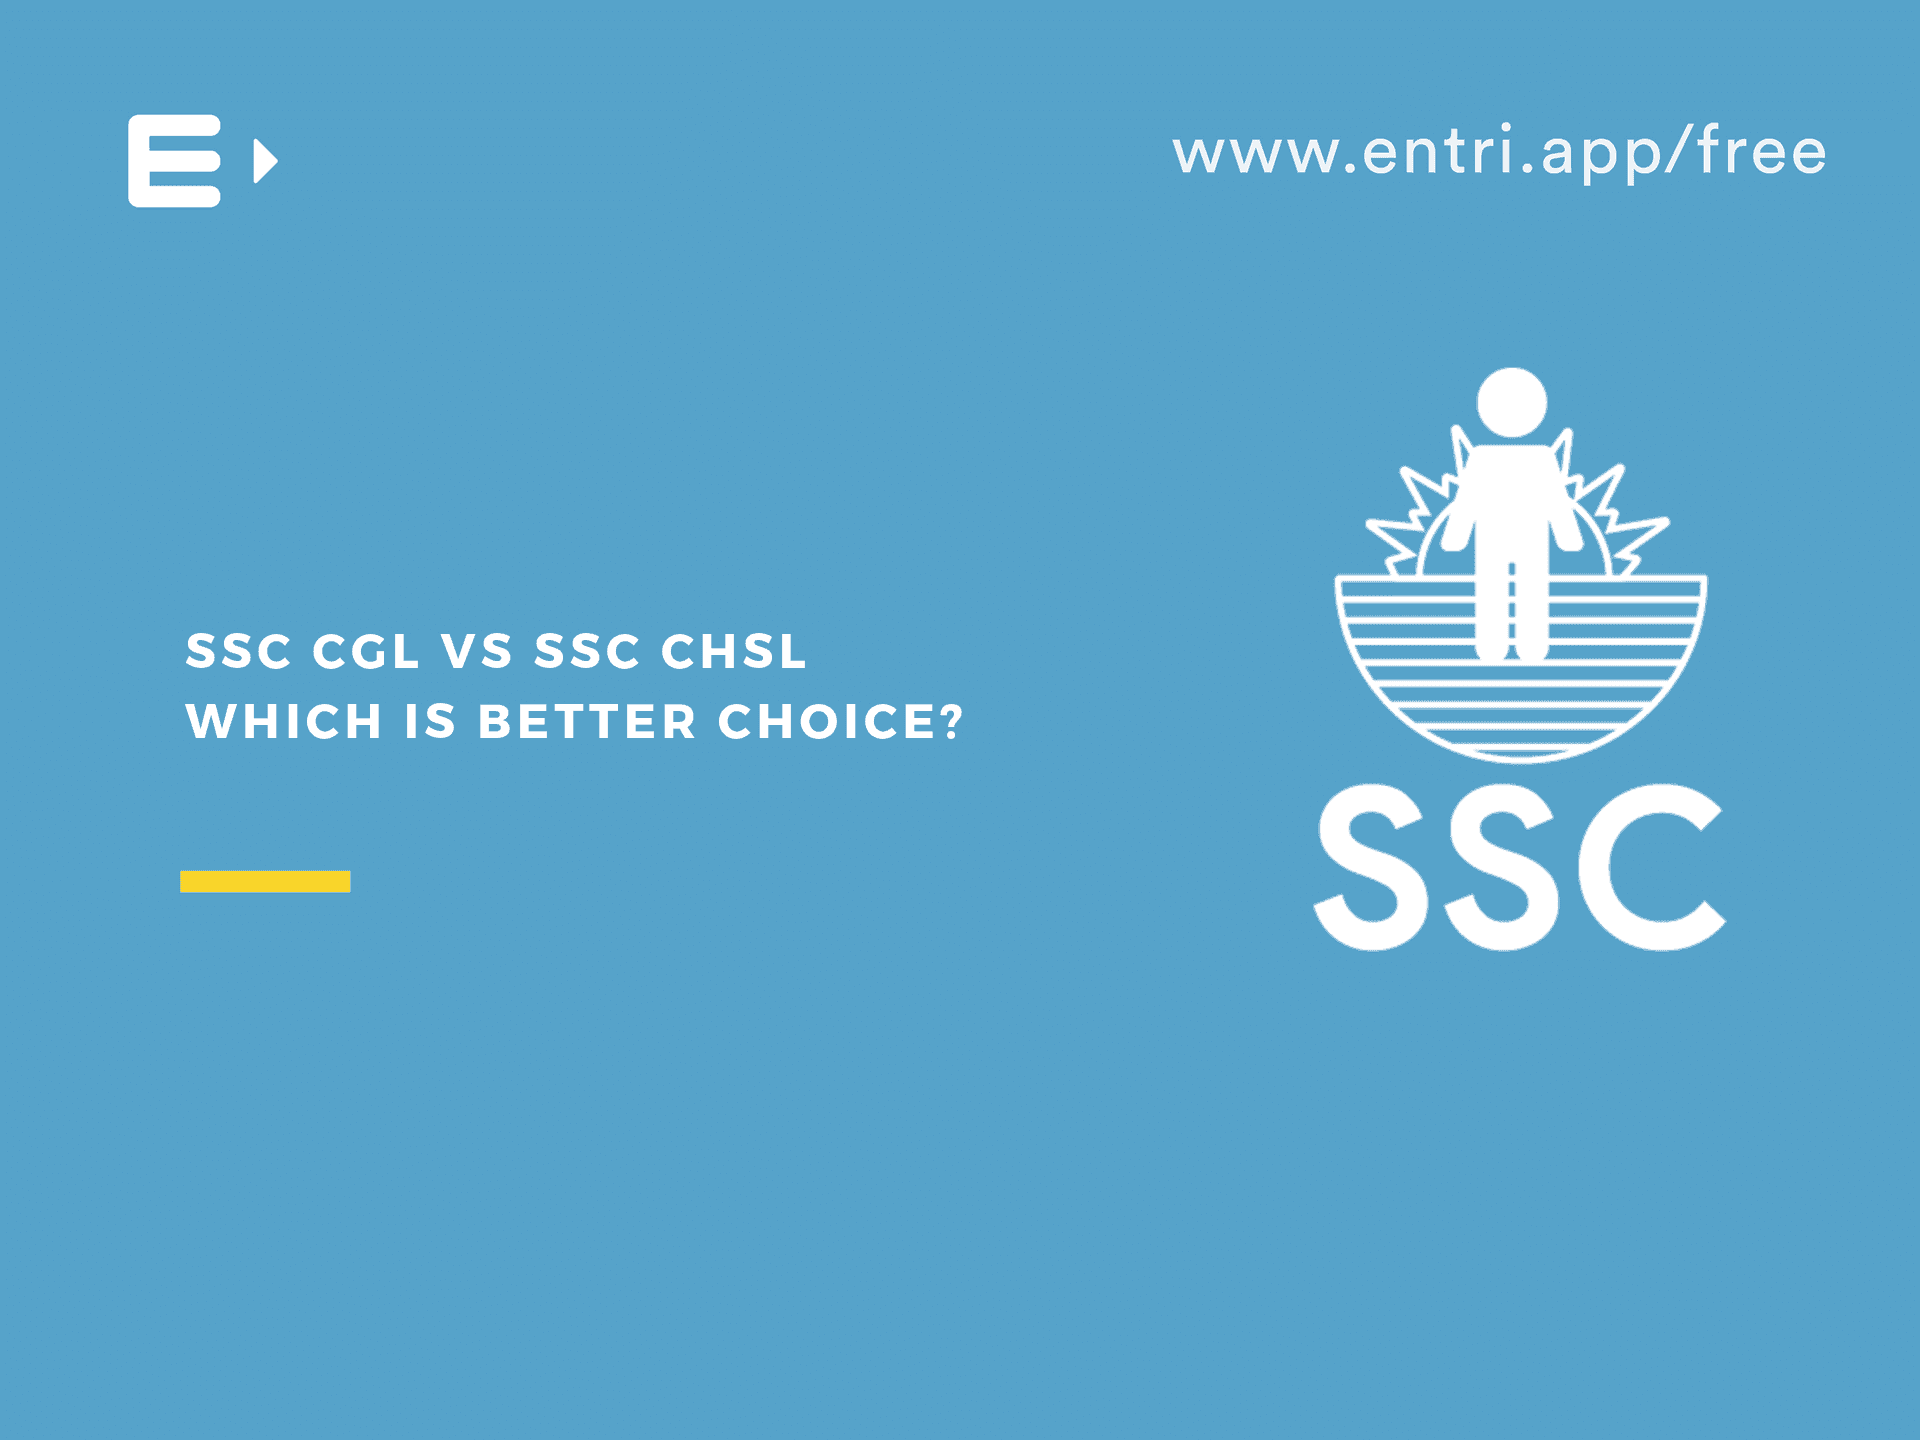 SSC CGL V/S SSC CHSL : Which is better Choice? - Entri Blog